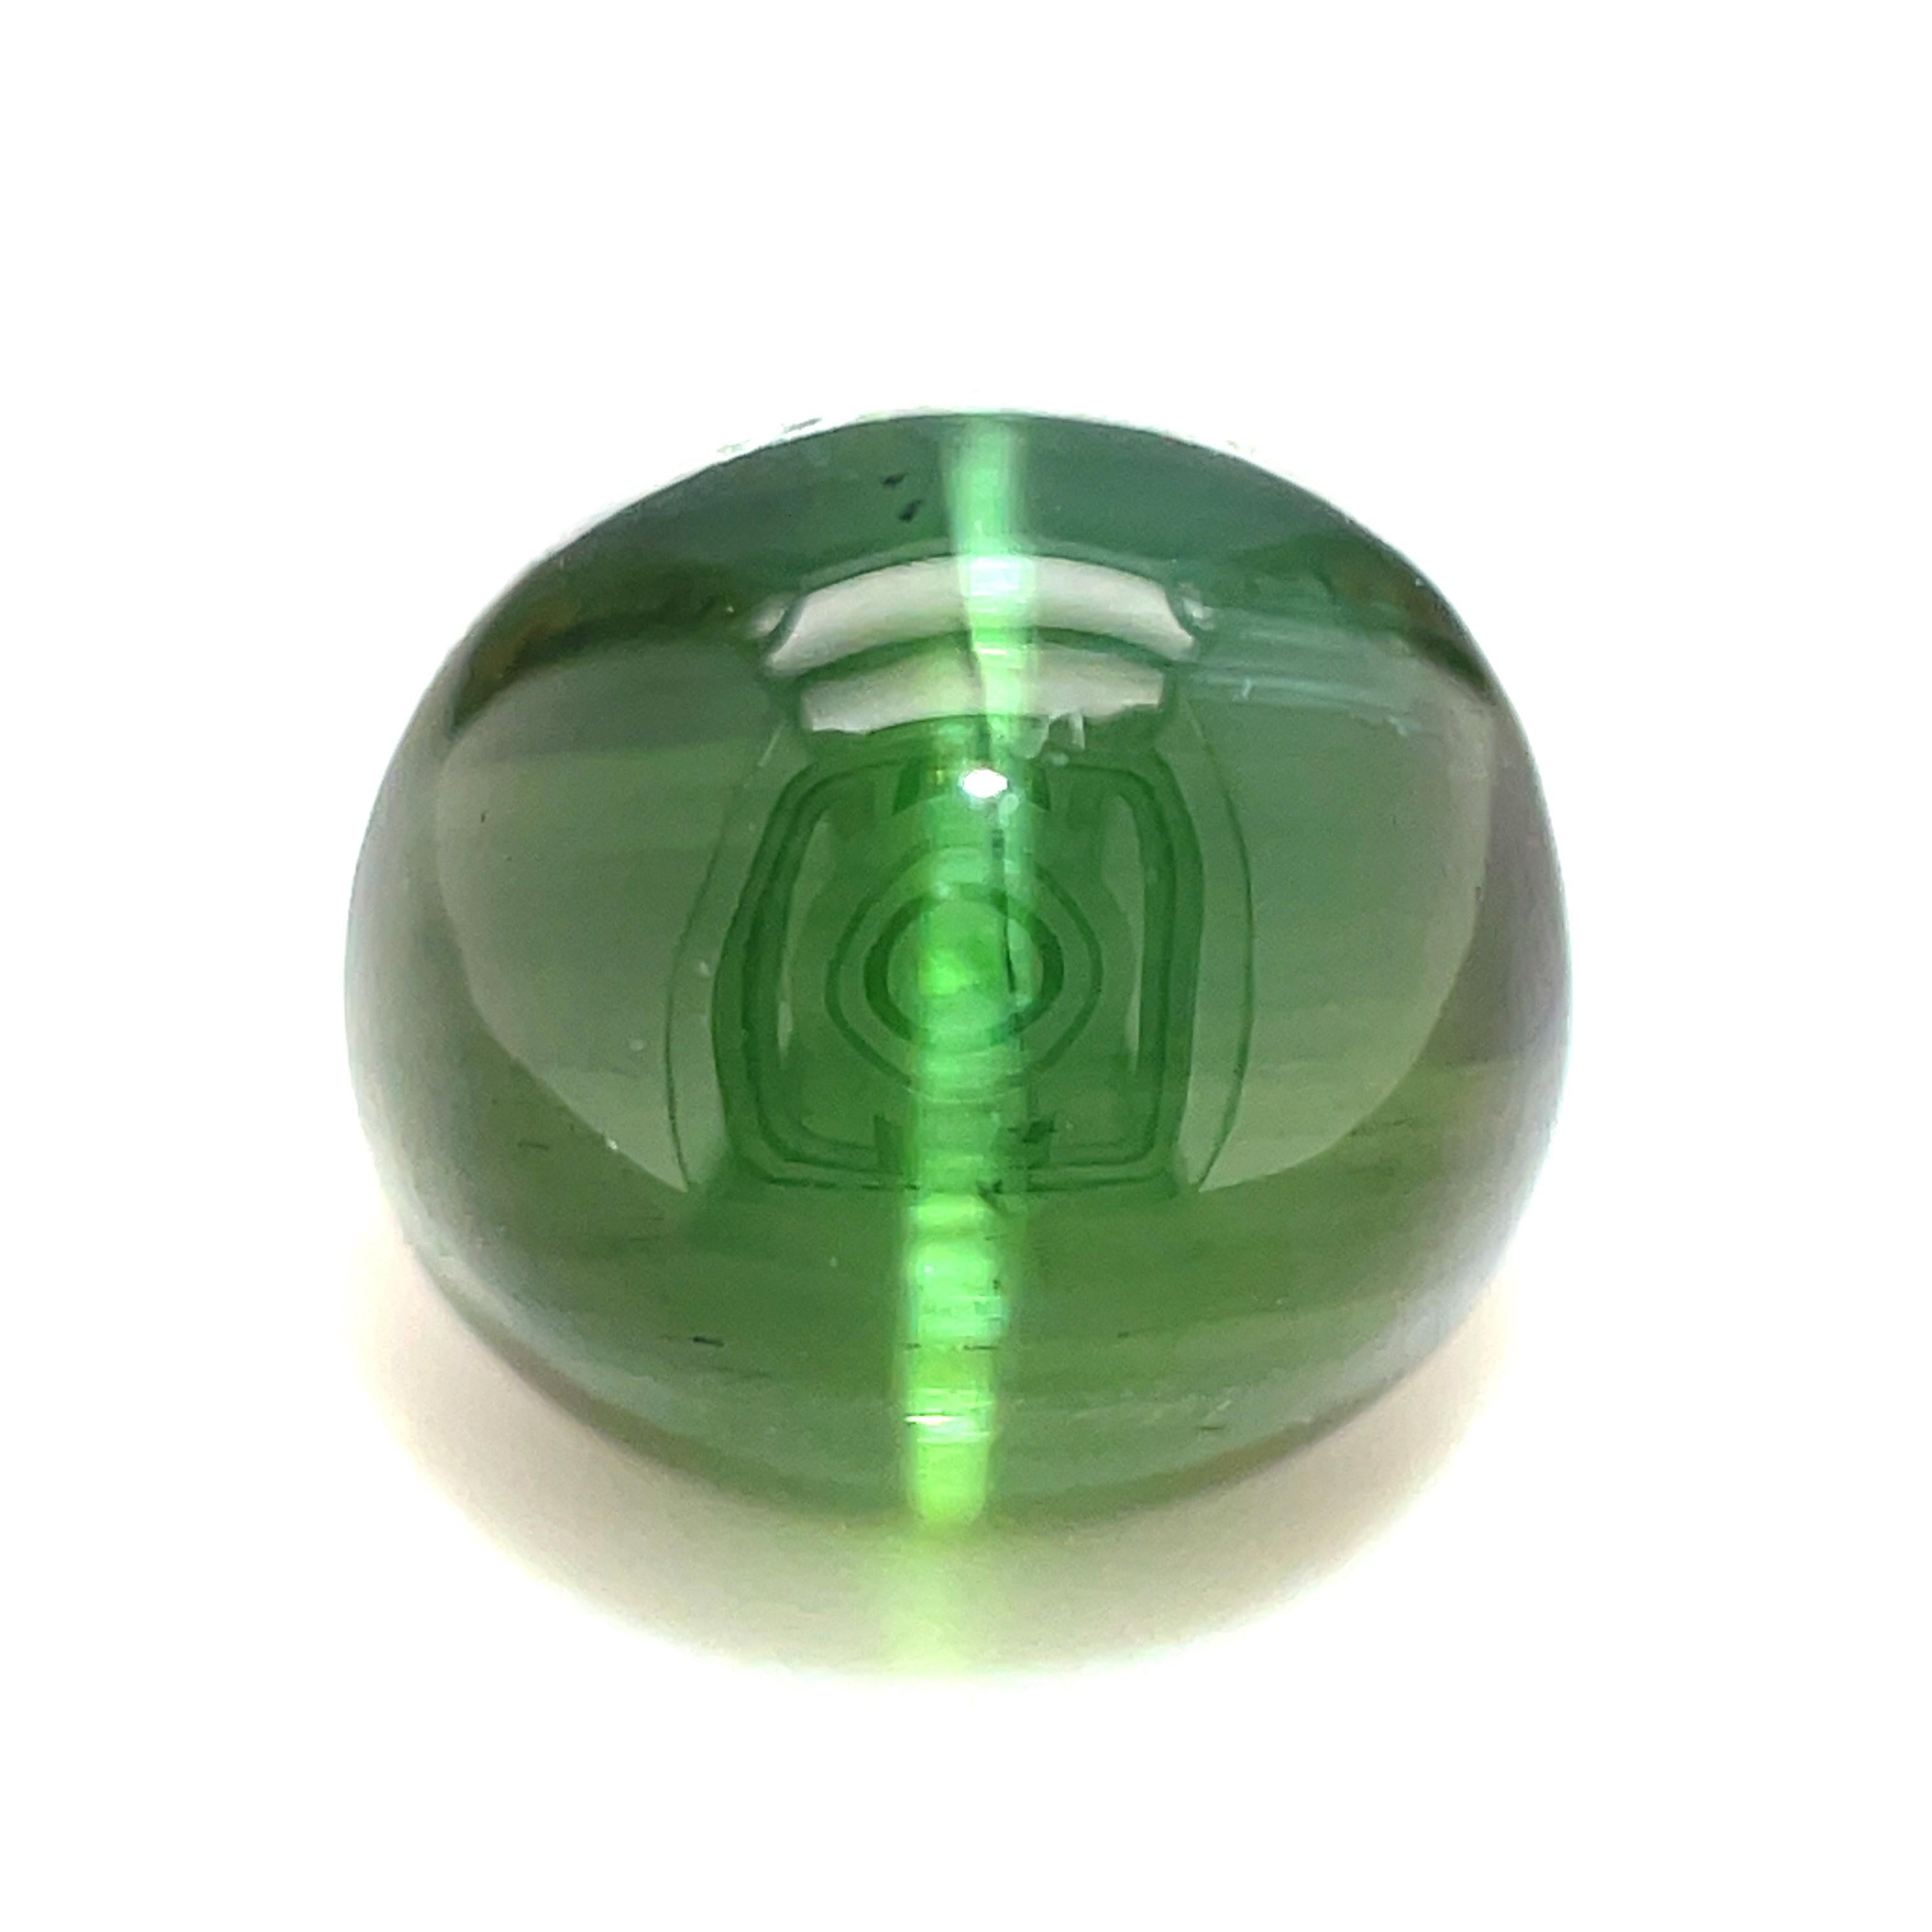 This lovely green cat's eye tourmaline is a rare occurance in nature. Weighing 3.87 carats and measuring 8.72 x 8.34 x 6.12 millimeters, this is the perfect size for a ring. The clear, sharp and straight eye dances across a translucent, spearmint